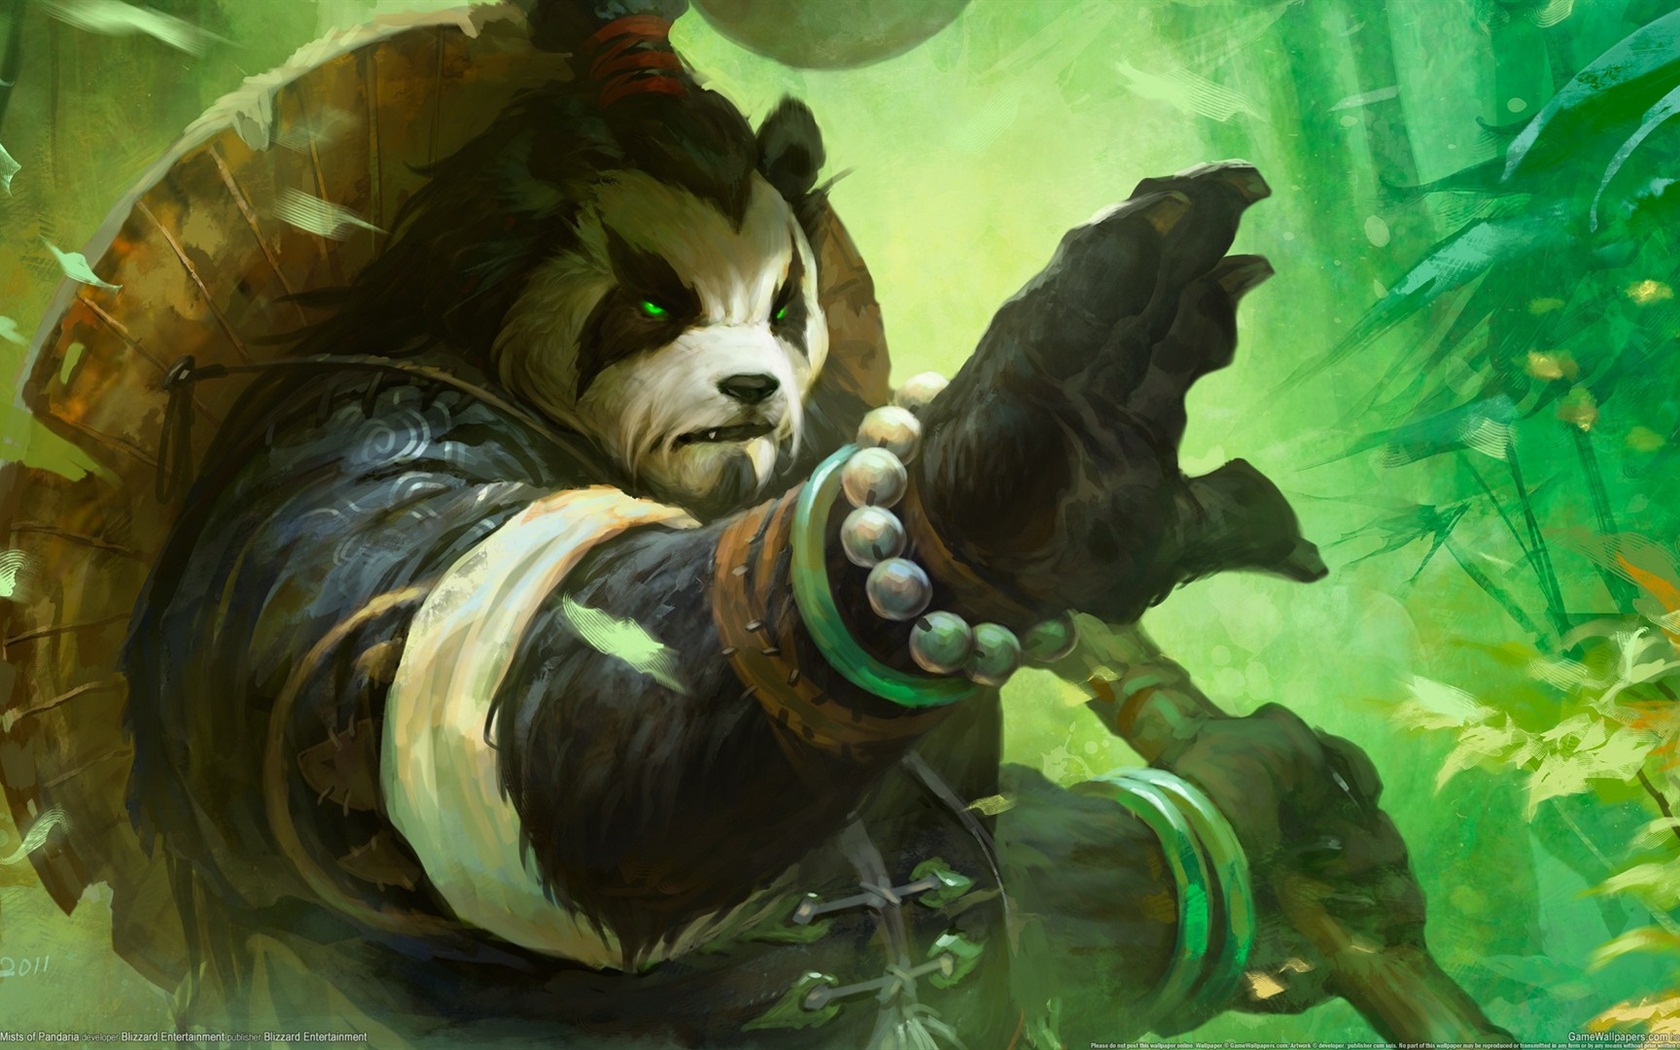 World of Warcraft: Mists of Pandaria HD wallpapers #11 - 1680x1050